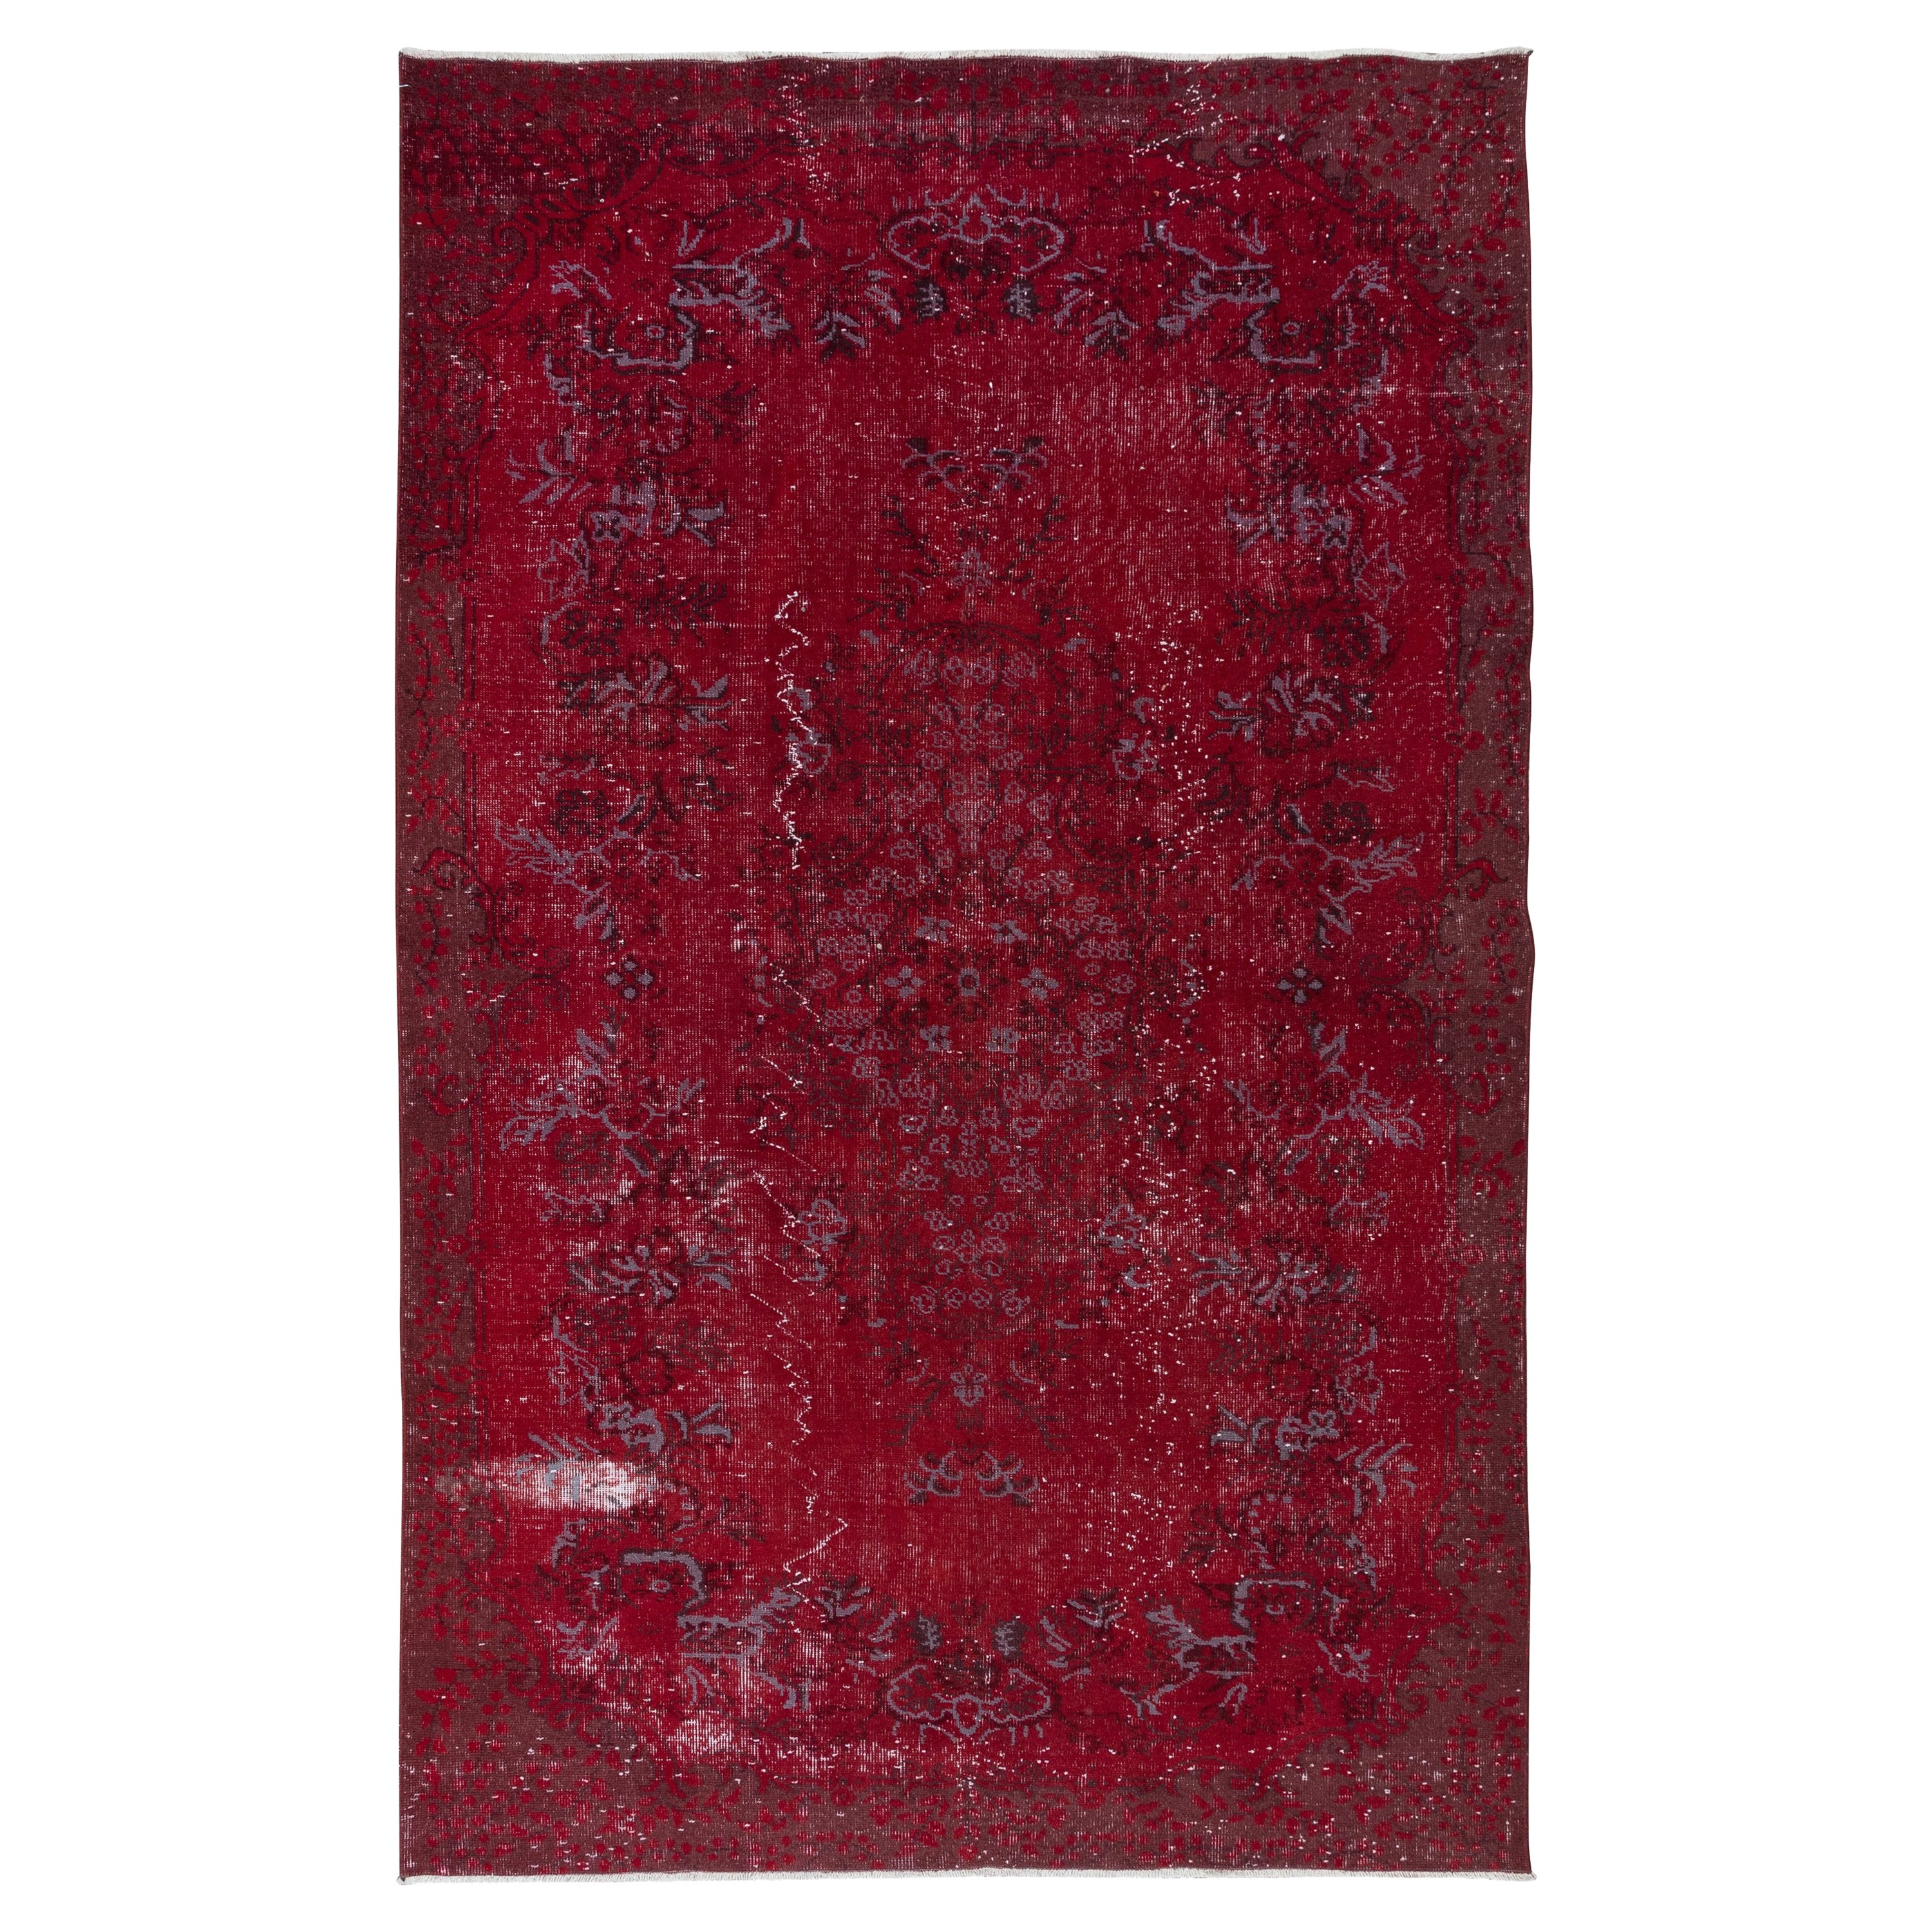 5.8x9.4 Ft Handknotted Turkish Rug in Dark Red, Ideal for Contemporary Interiors For Sale